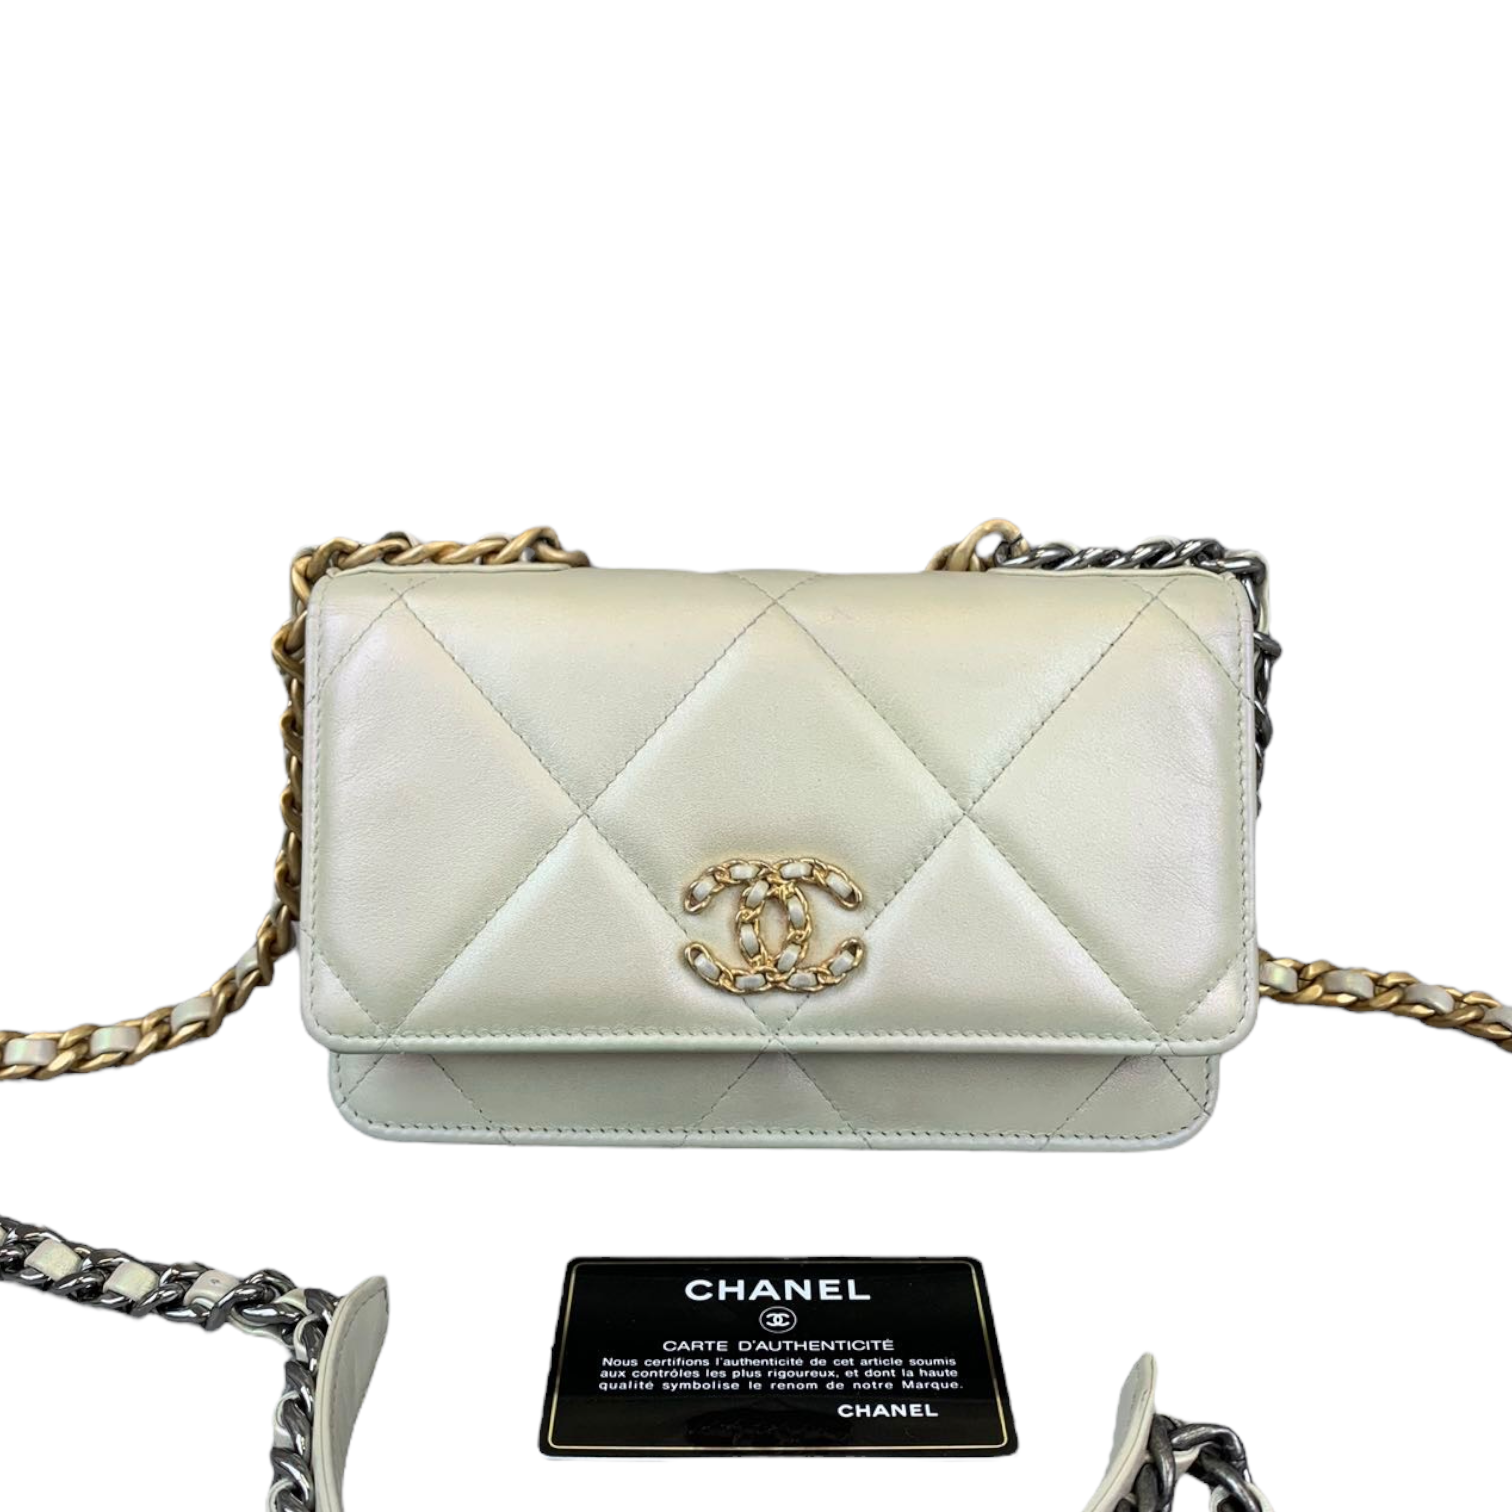 Snag the Latest CHANEL Tote White Bags & Handbags for Women with Fast and  Free Shipping. Authenticity Guaranteed on Designer Handbags $500+ at .